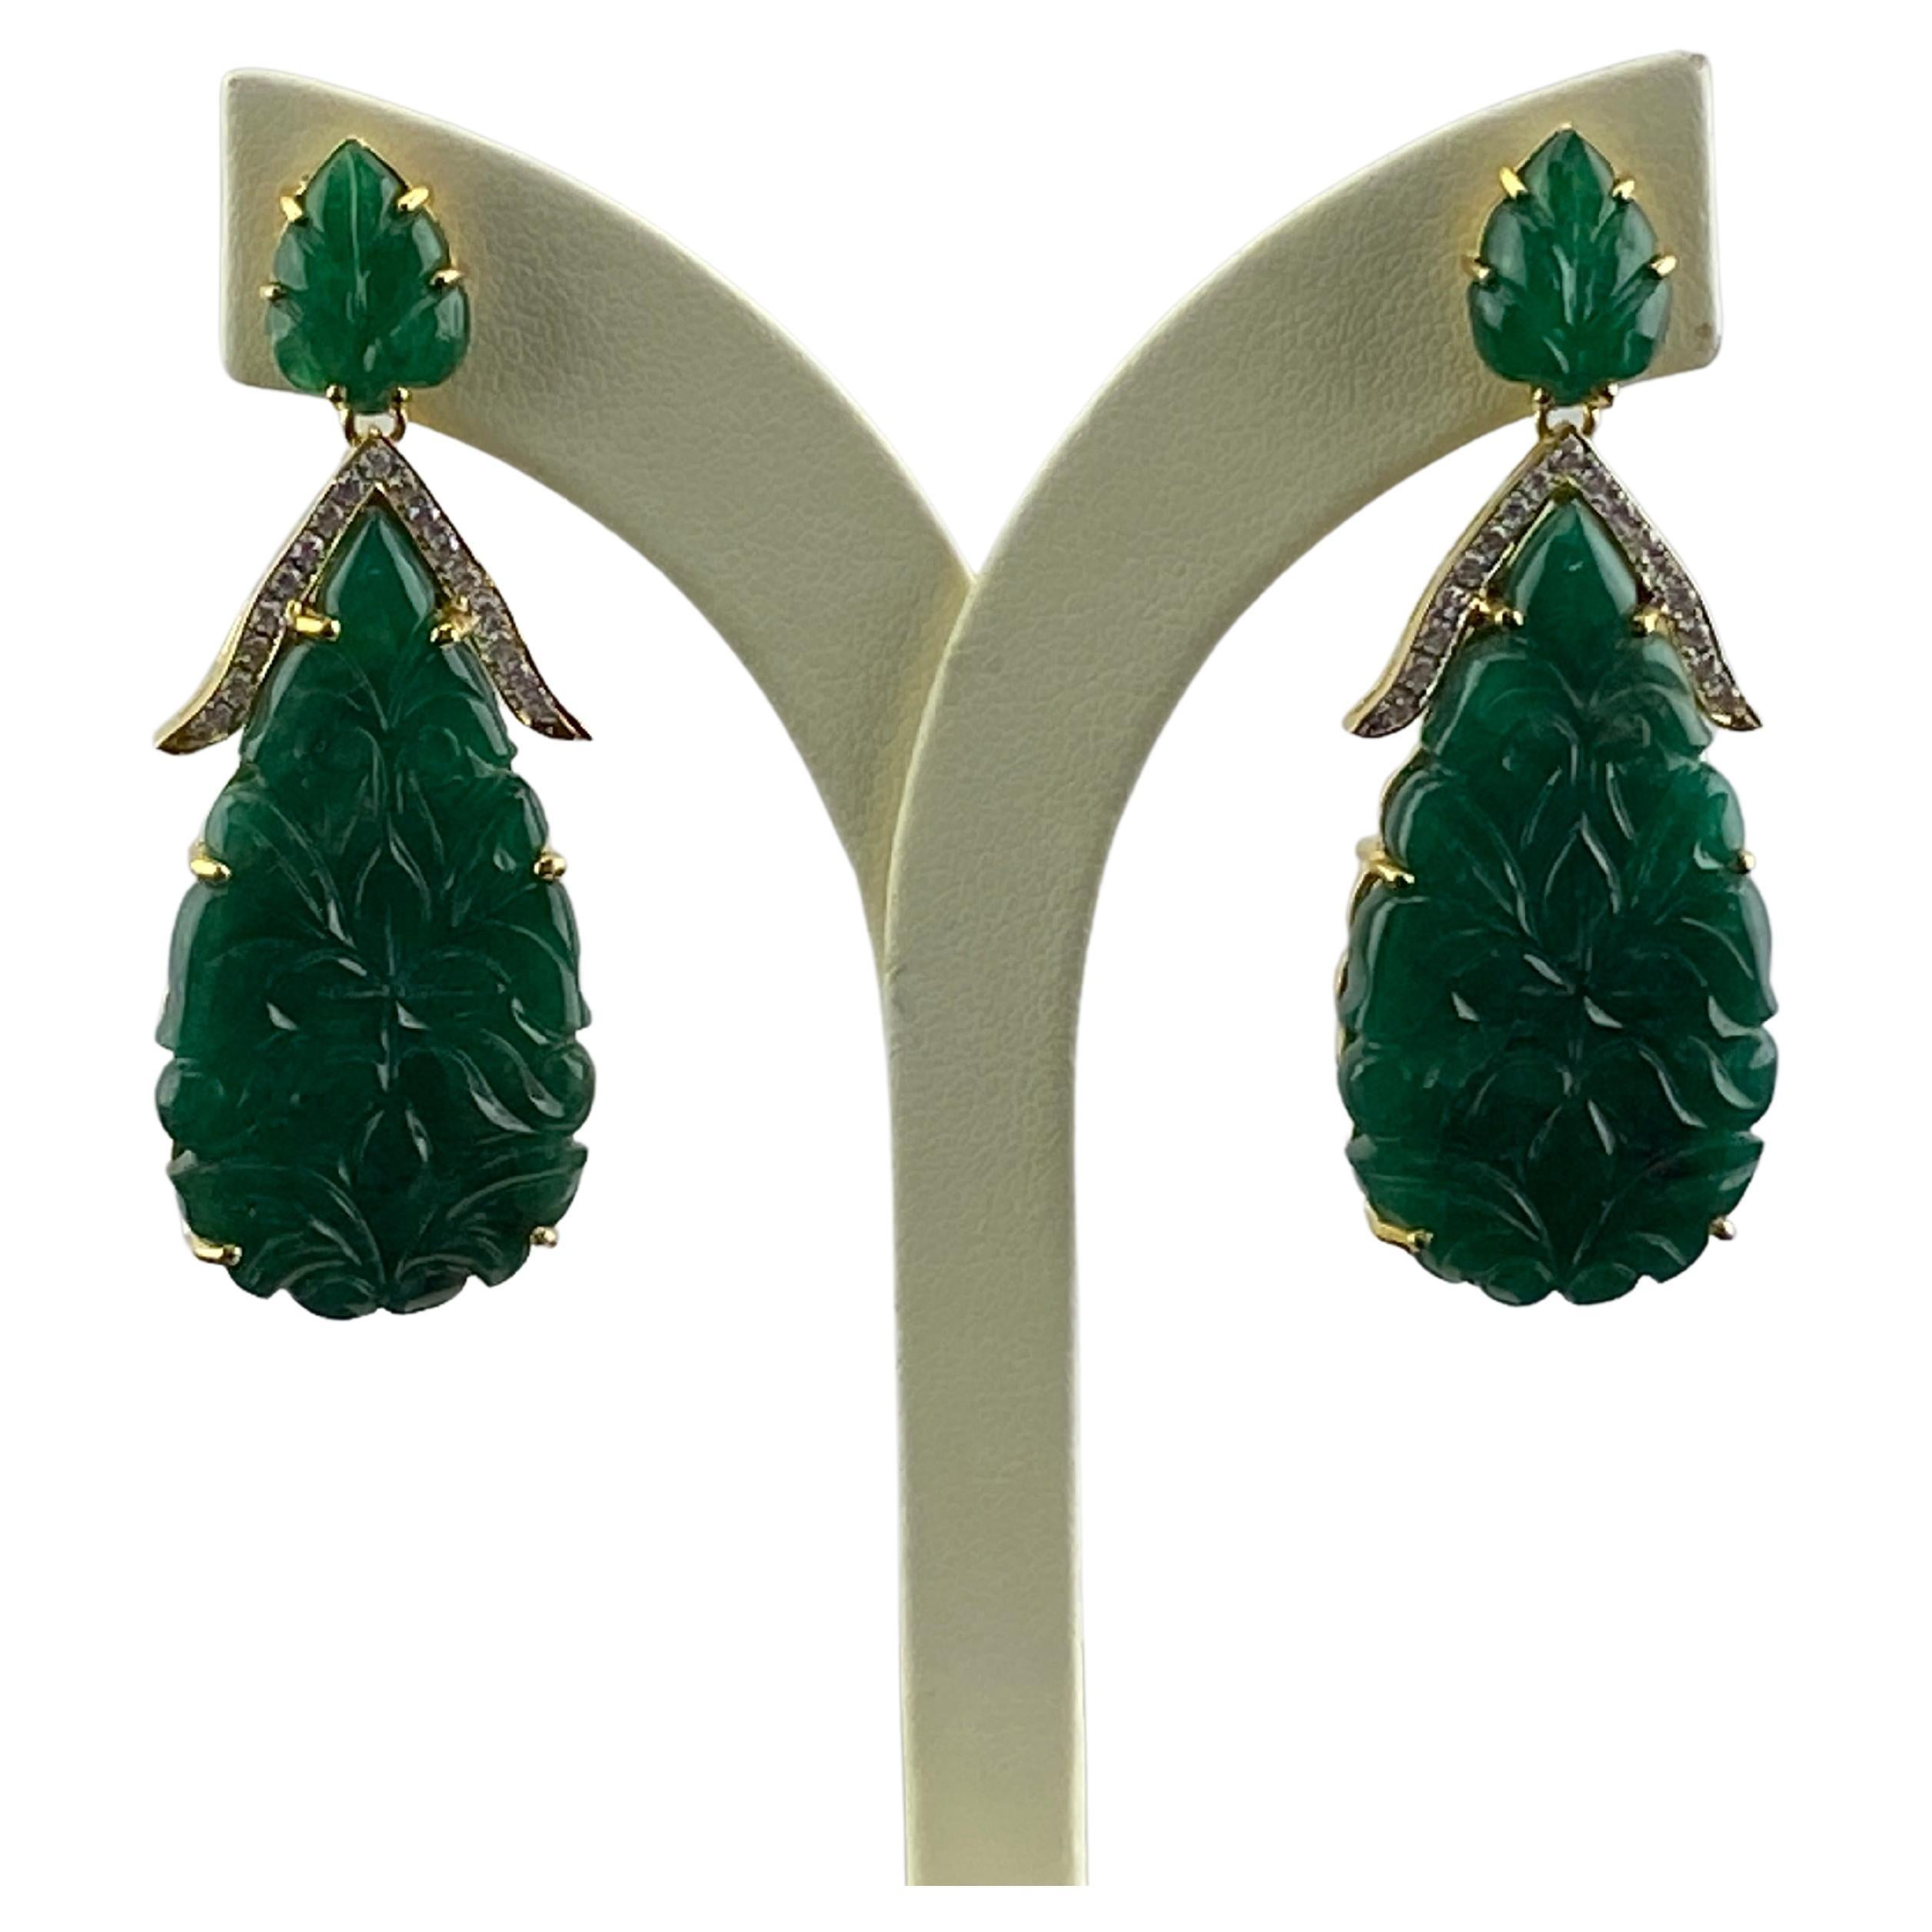 An art-deco style 59.83 carat carved Zambian Emerald dangle earrings, with 0.51 carat White Diamonds all set in 18K Yellow Gold. The earrings come with a push-pull backings, and this pair of earrings can be customized according to your